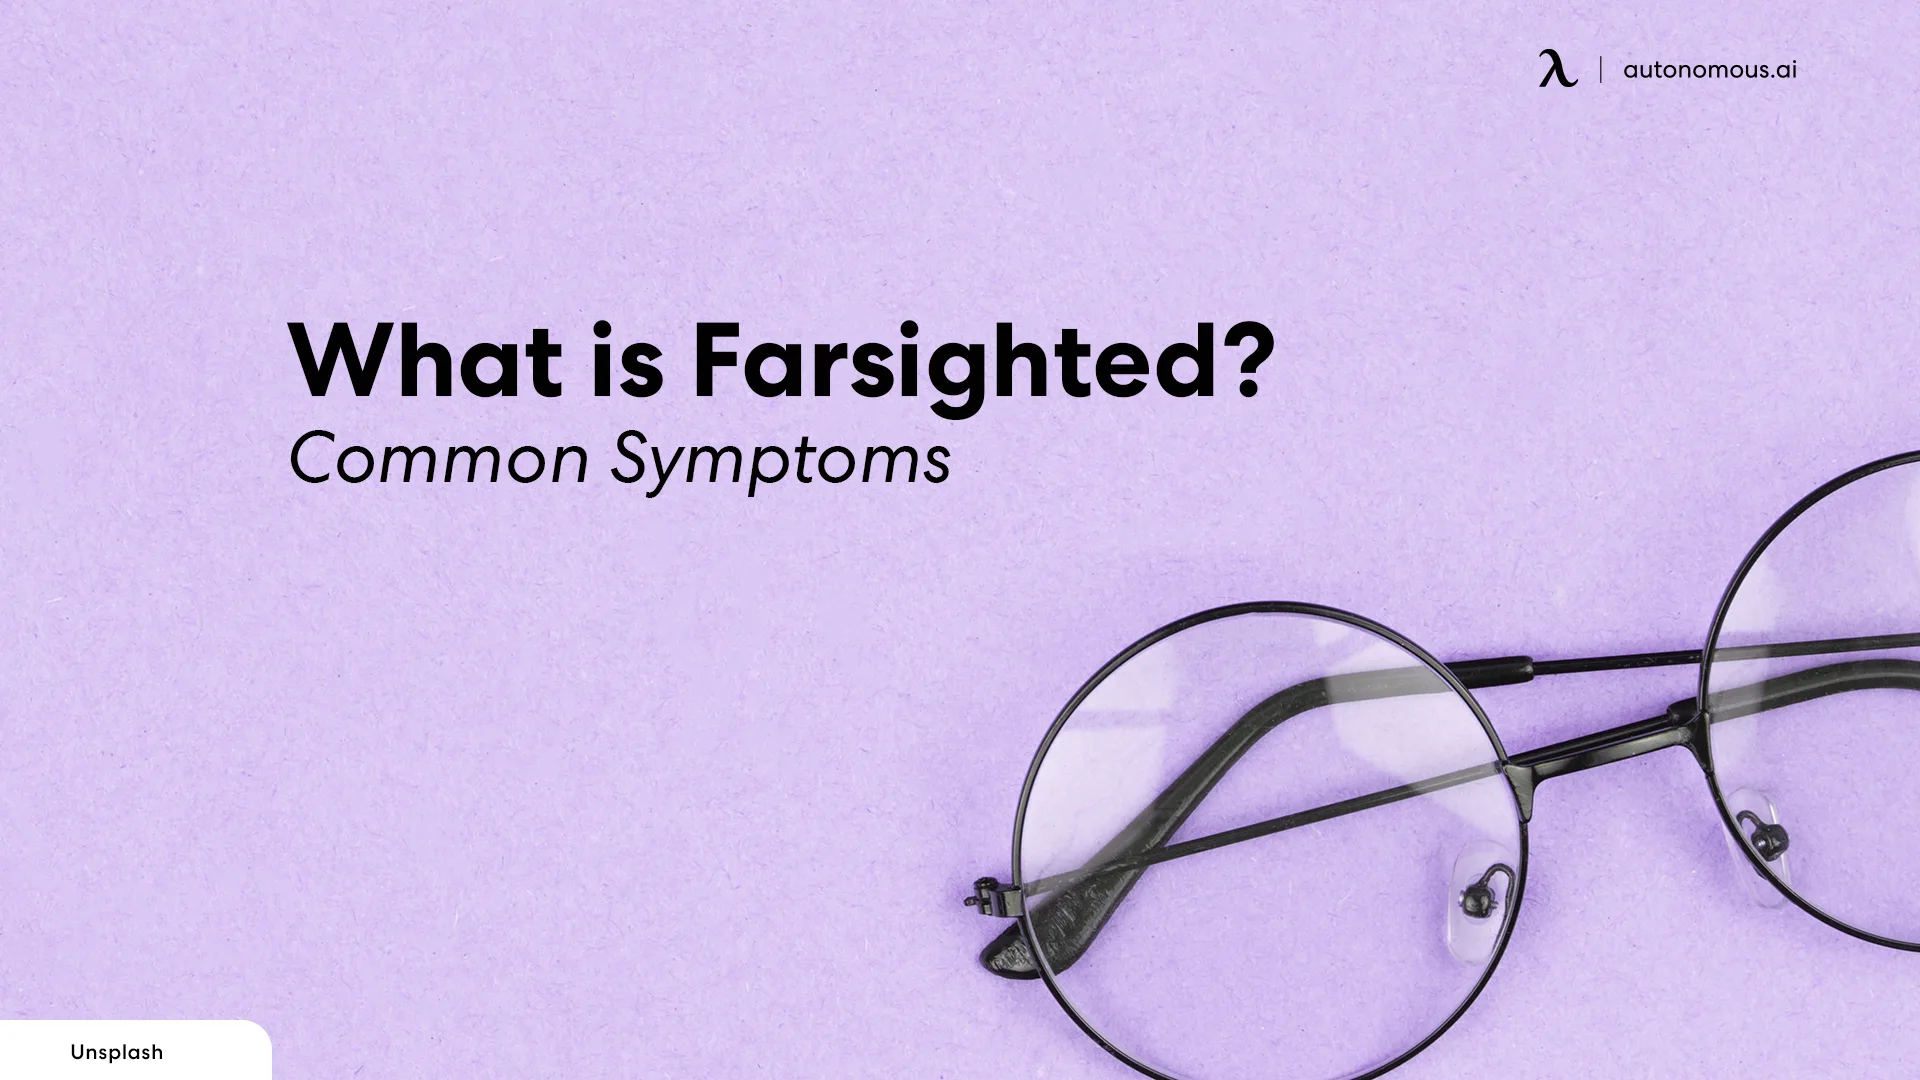 What is Farsighted?